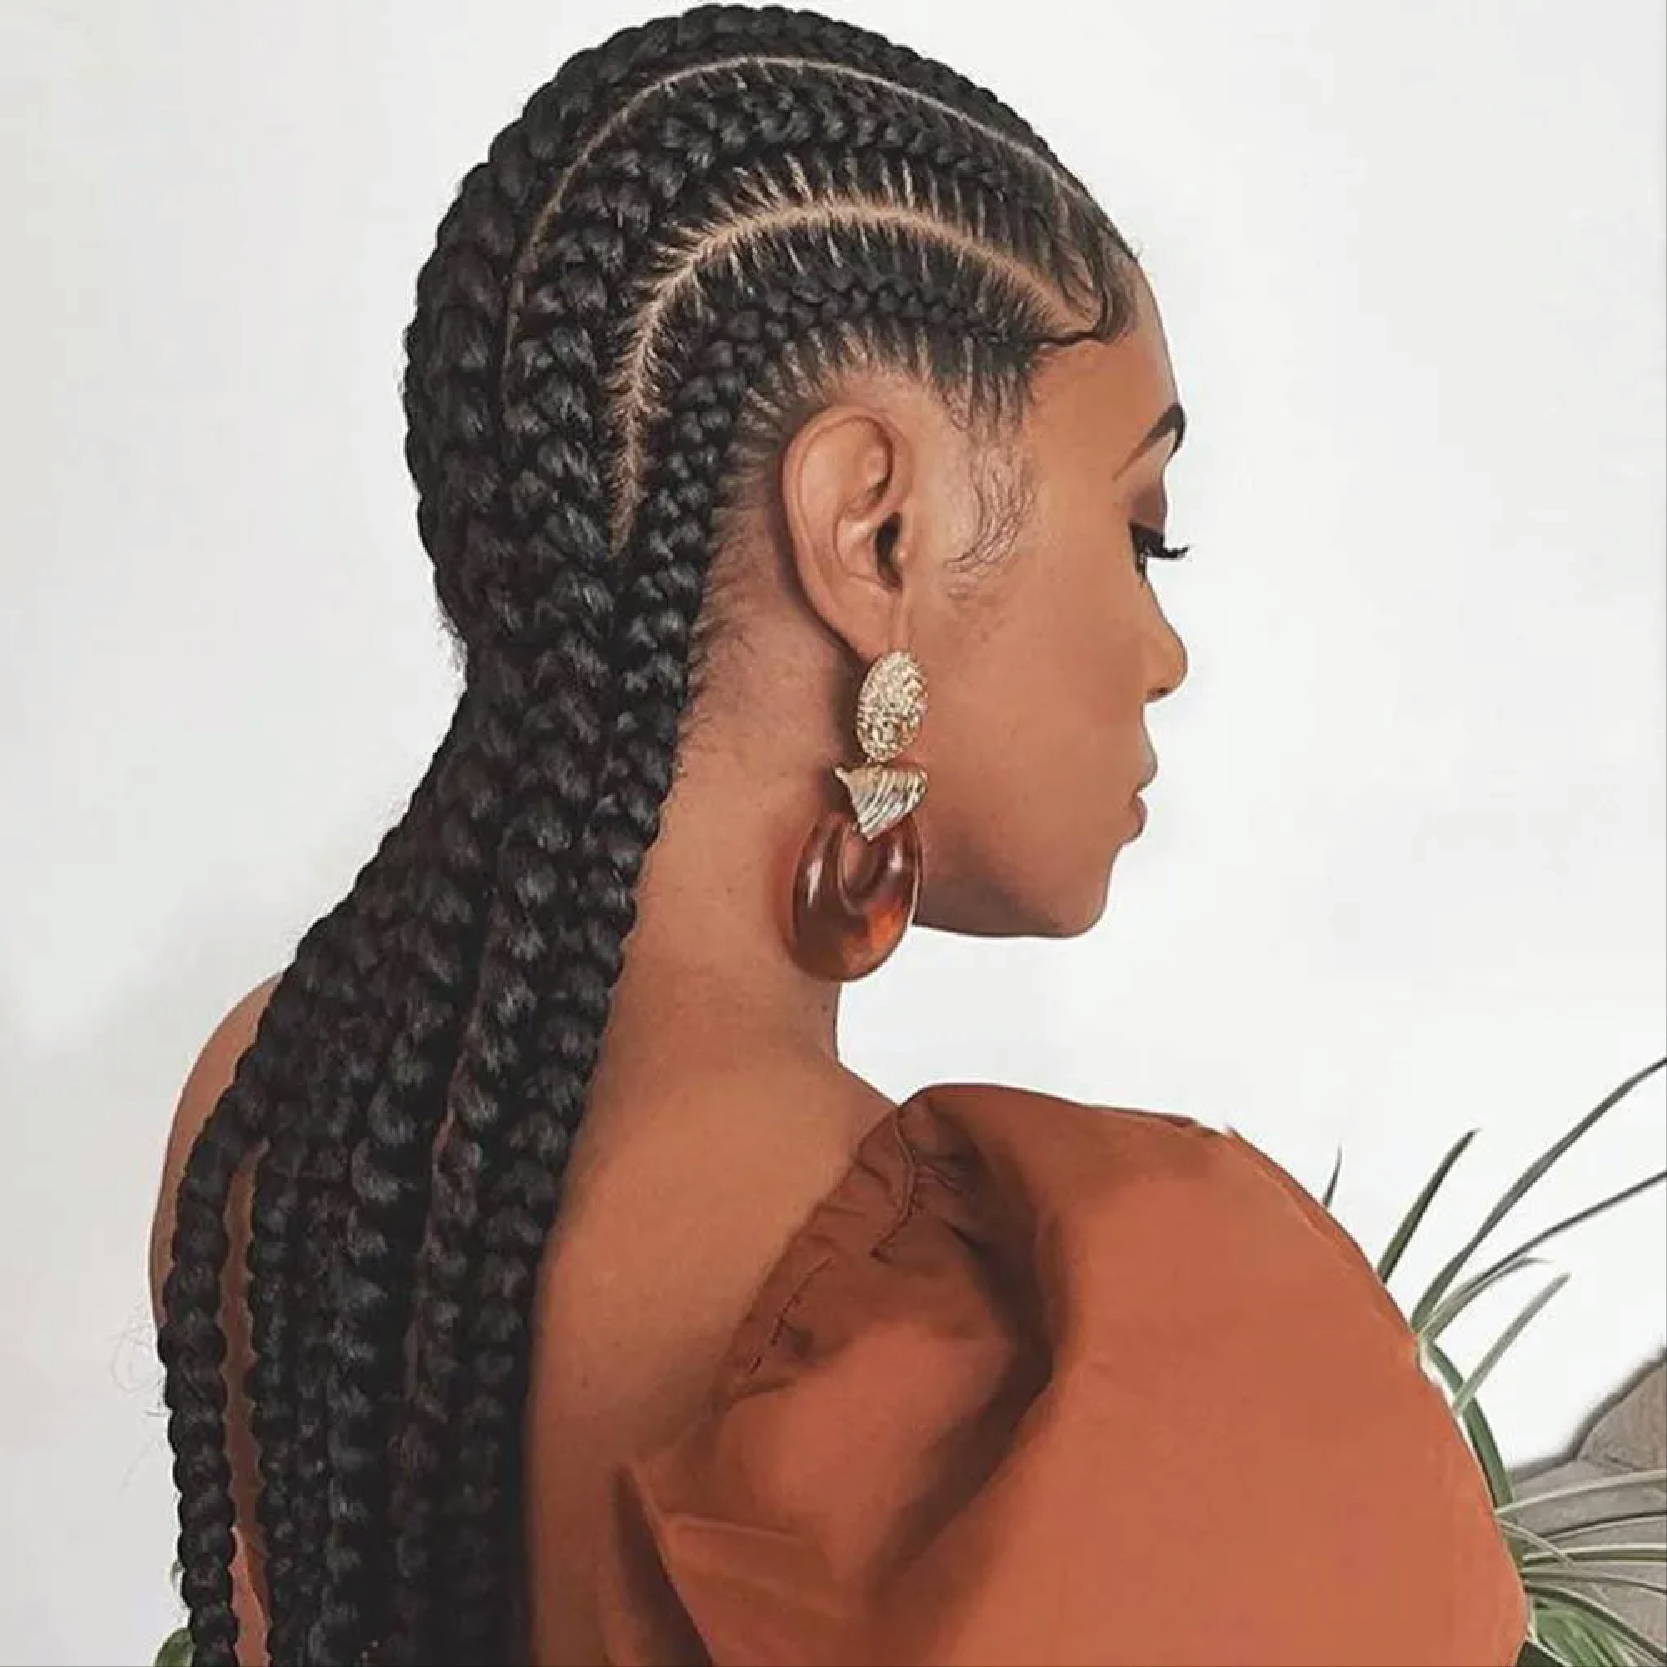 How to Care for Your Scalp While Wearing Braids and Twists